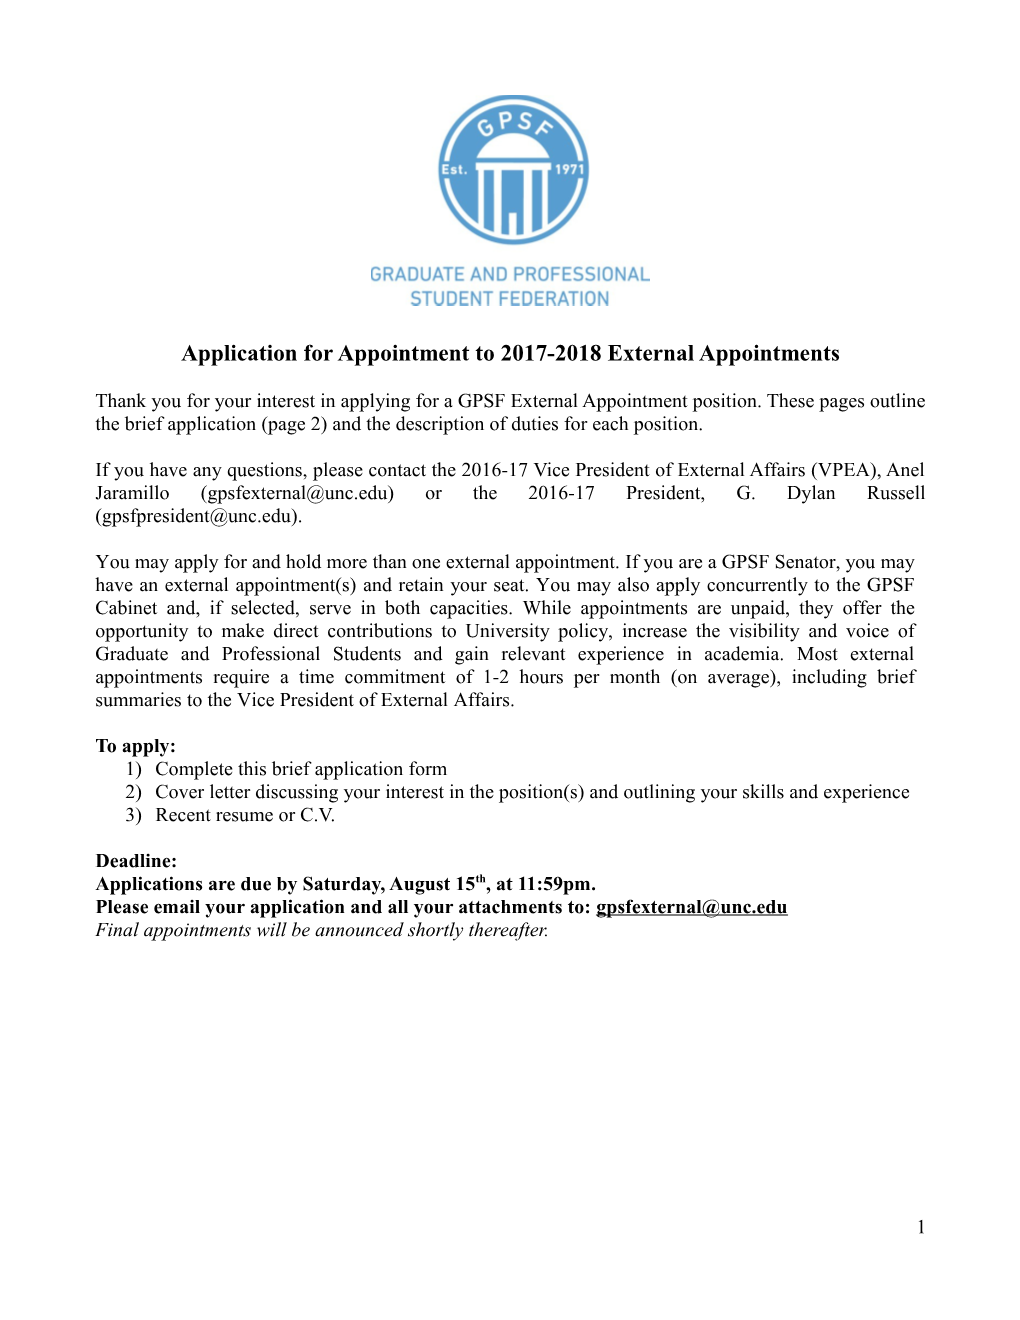 Application for Appointment to 2017-2018 External Appointments